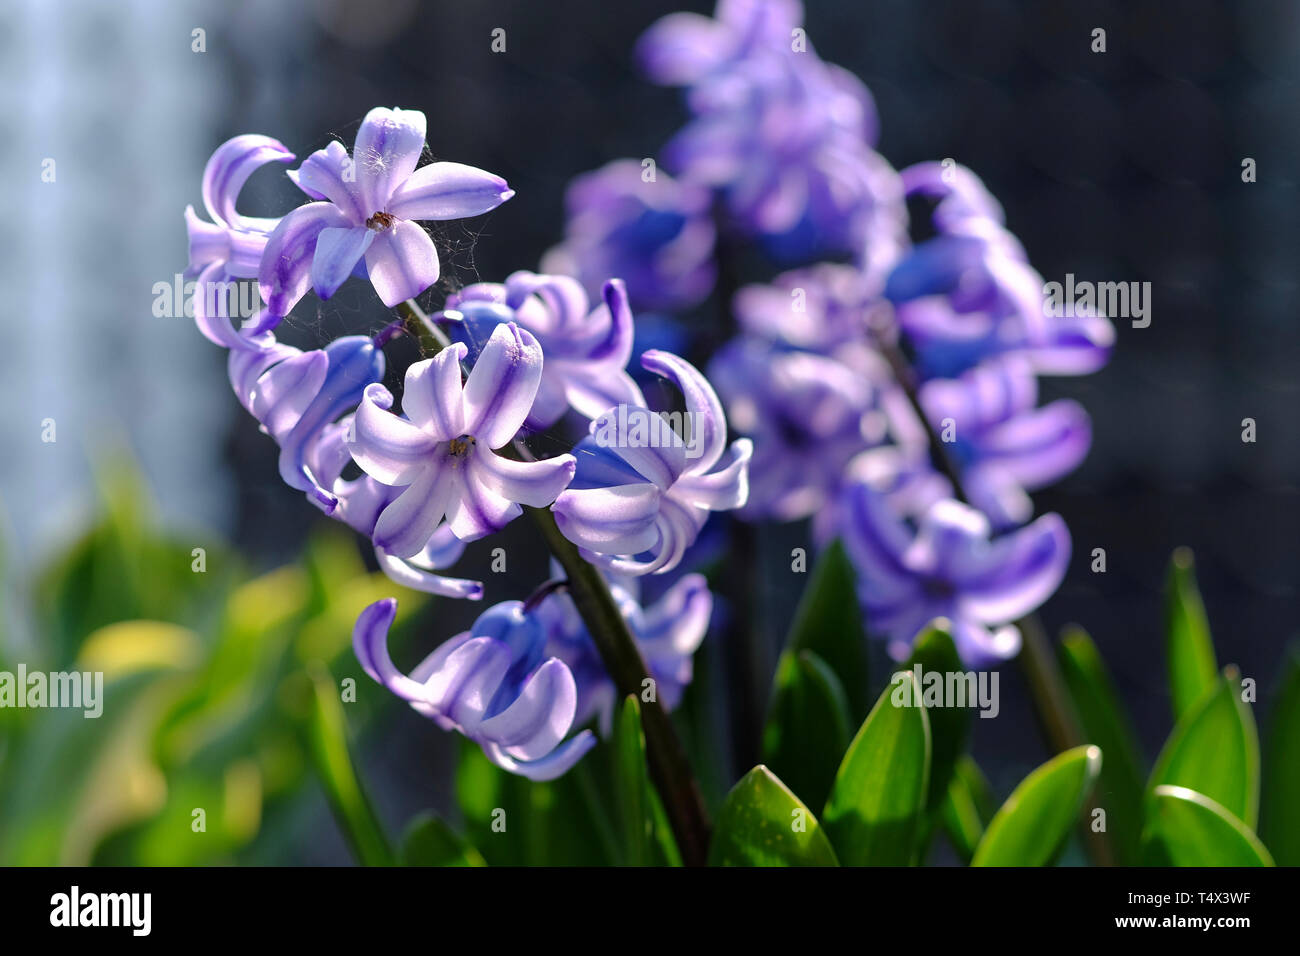 Hyacinthus flowers blossoming in spring Stock Photo